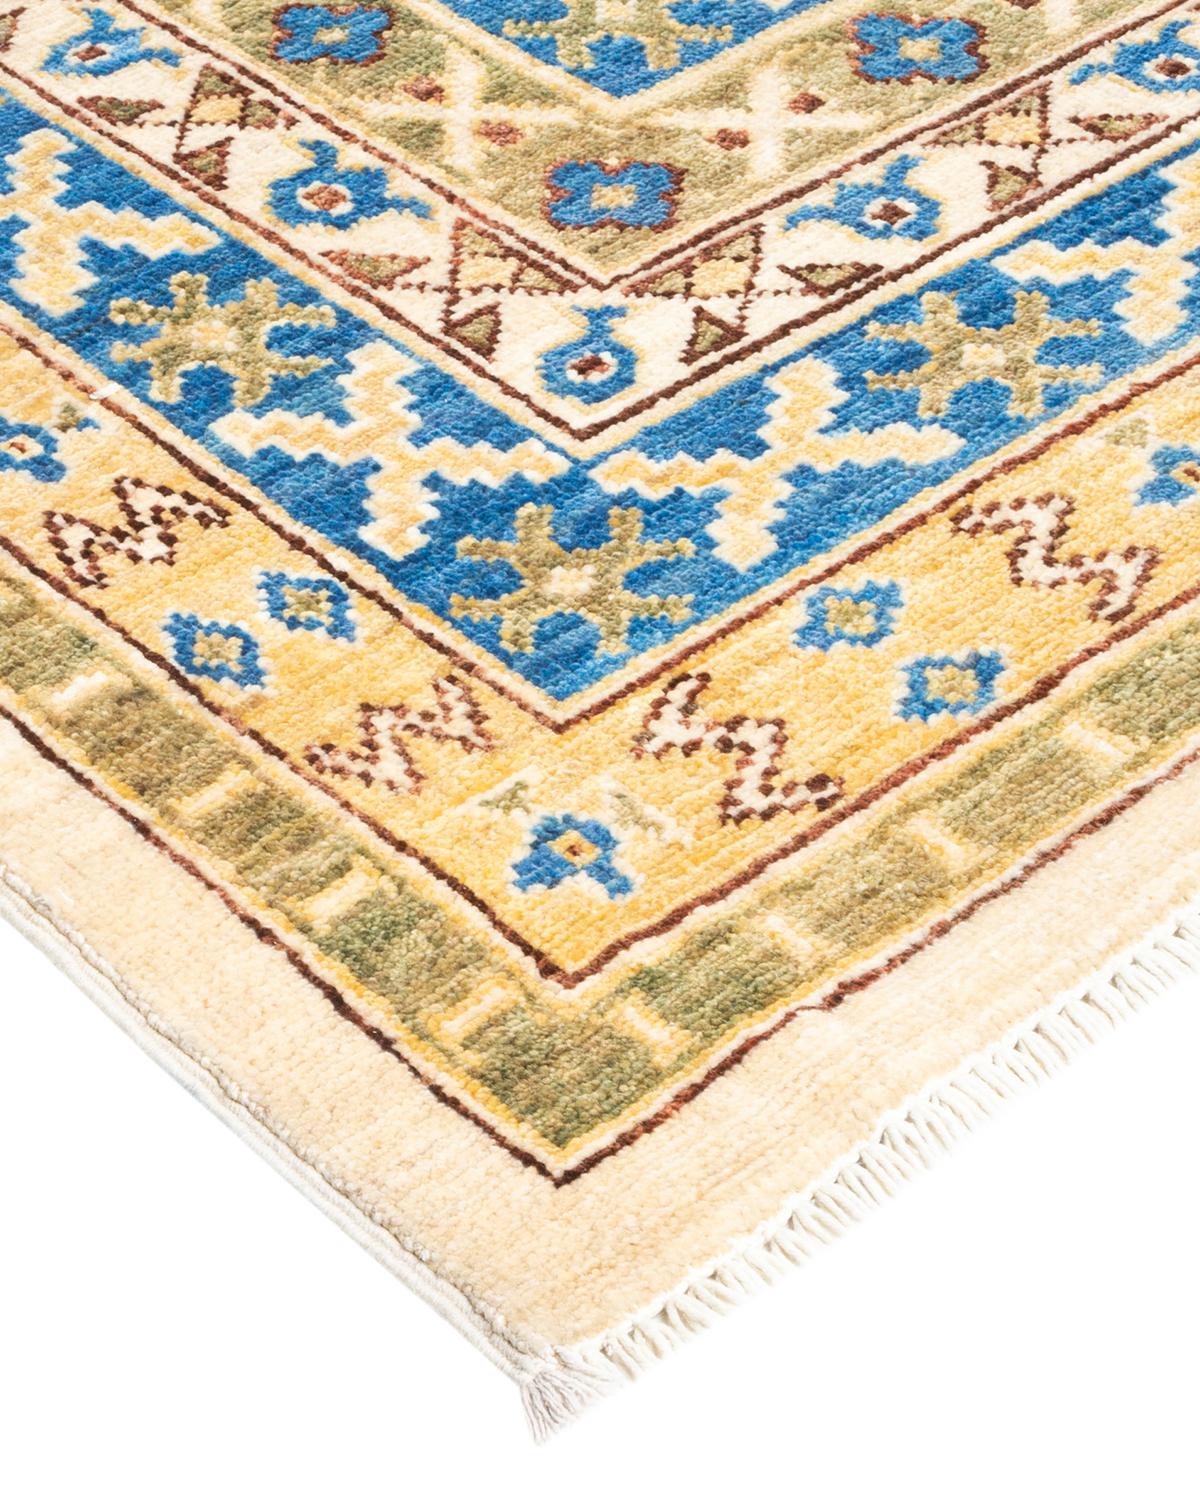 The city of Khotan was a key trading post along the Silk Road, and the rugs woven there for centuries incorporated Chinese, Persian, and Western influences. Hand-knotted of soft, durable wool, this collection pays tribute to the original inventive